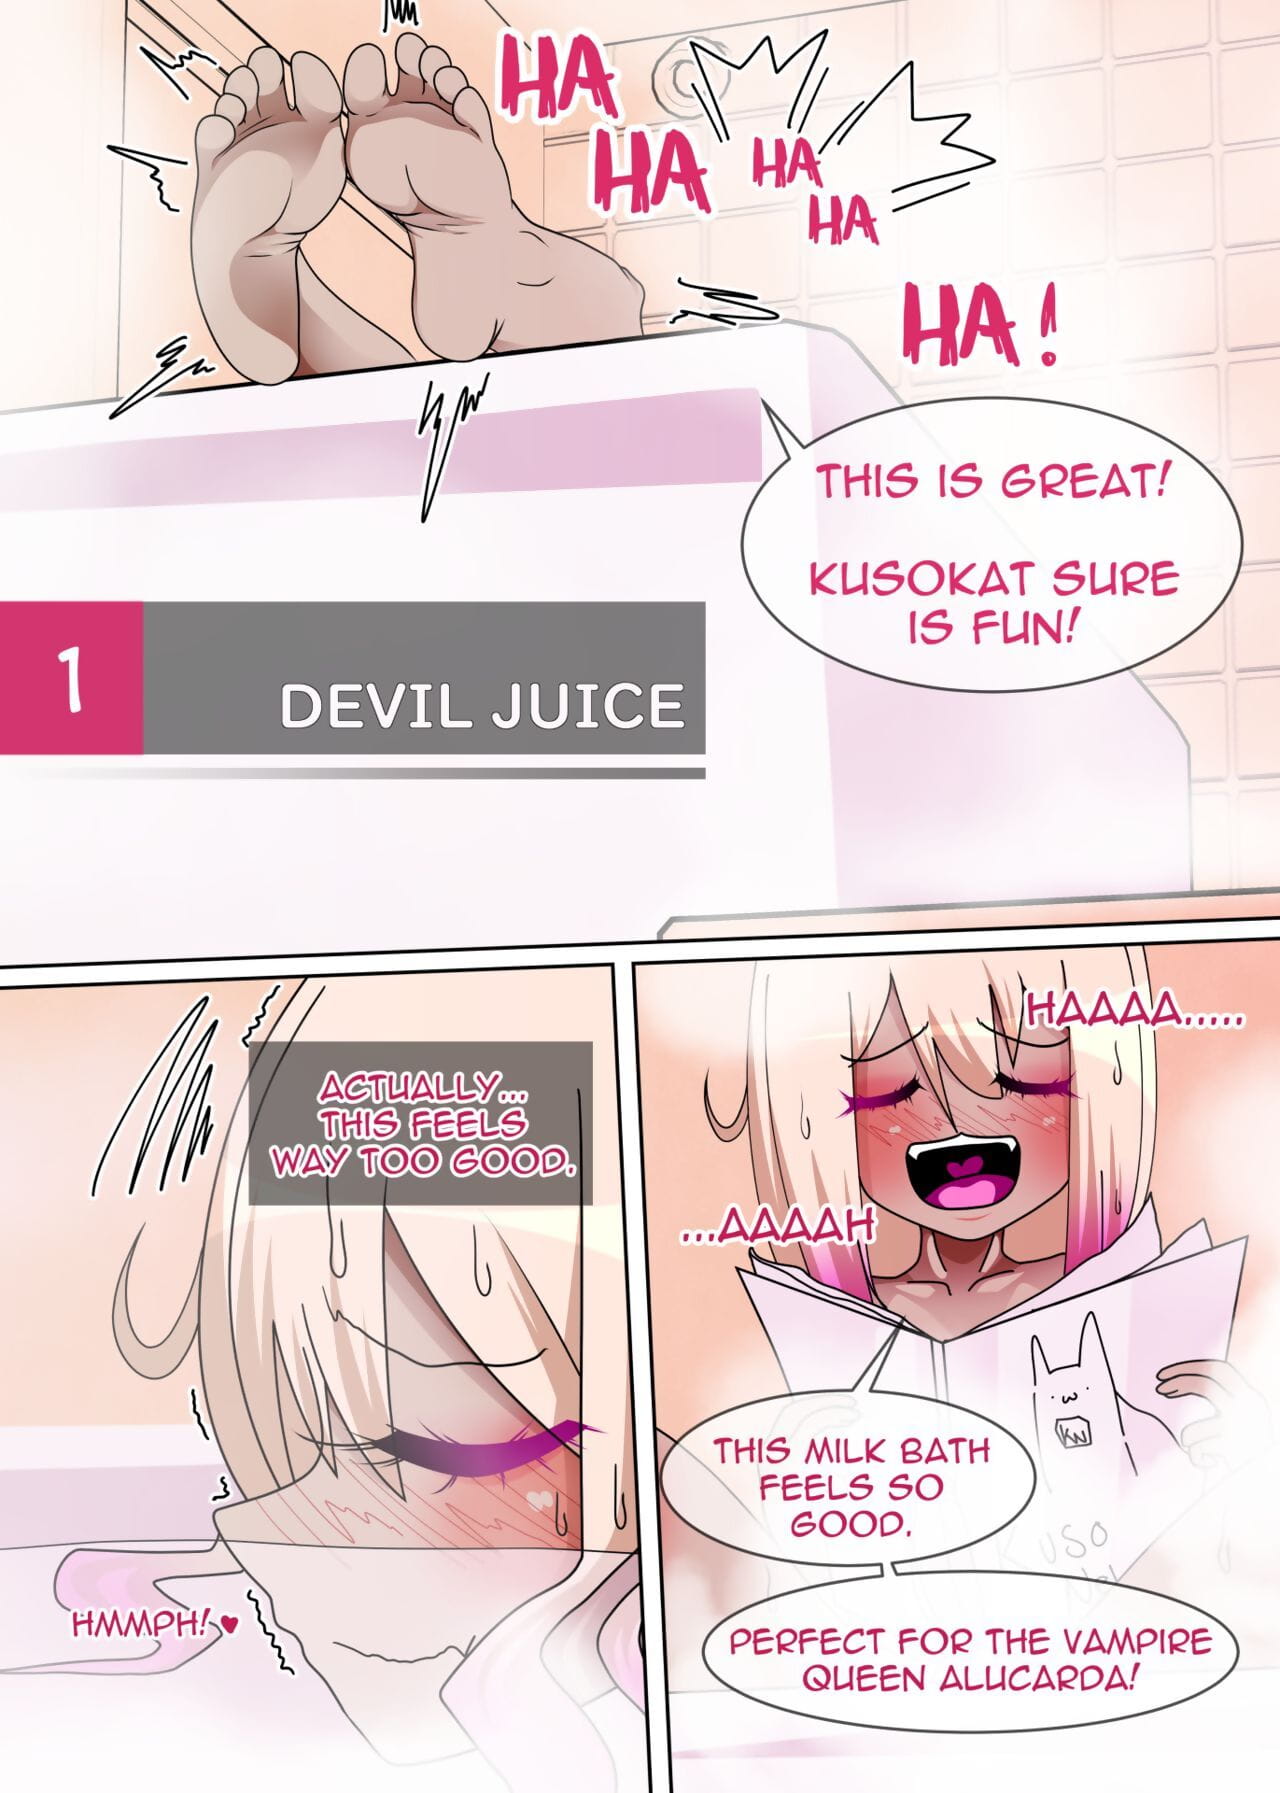 diable jus page 1